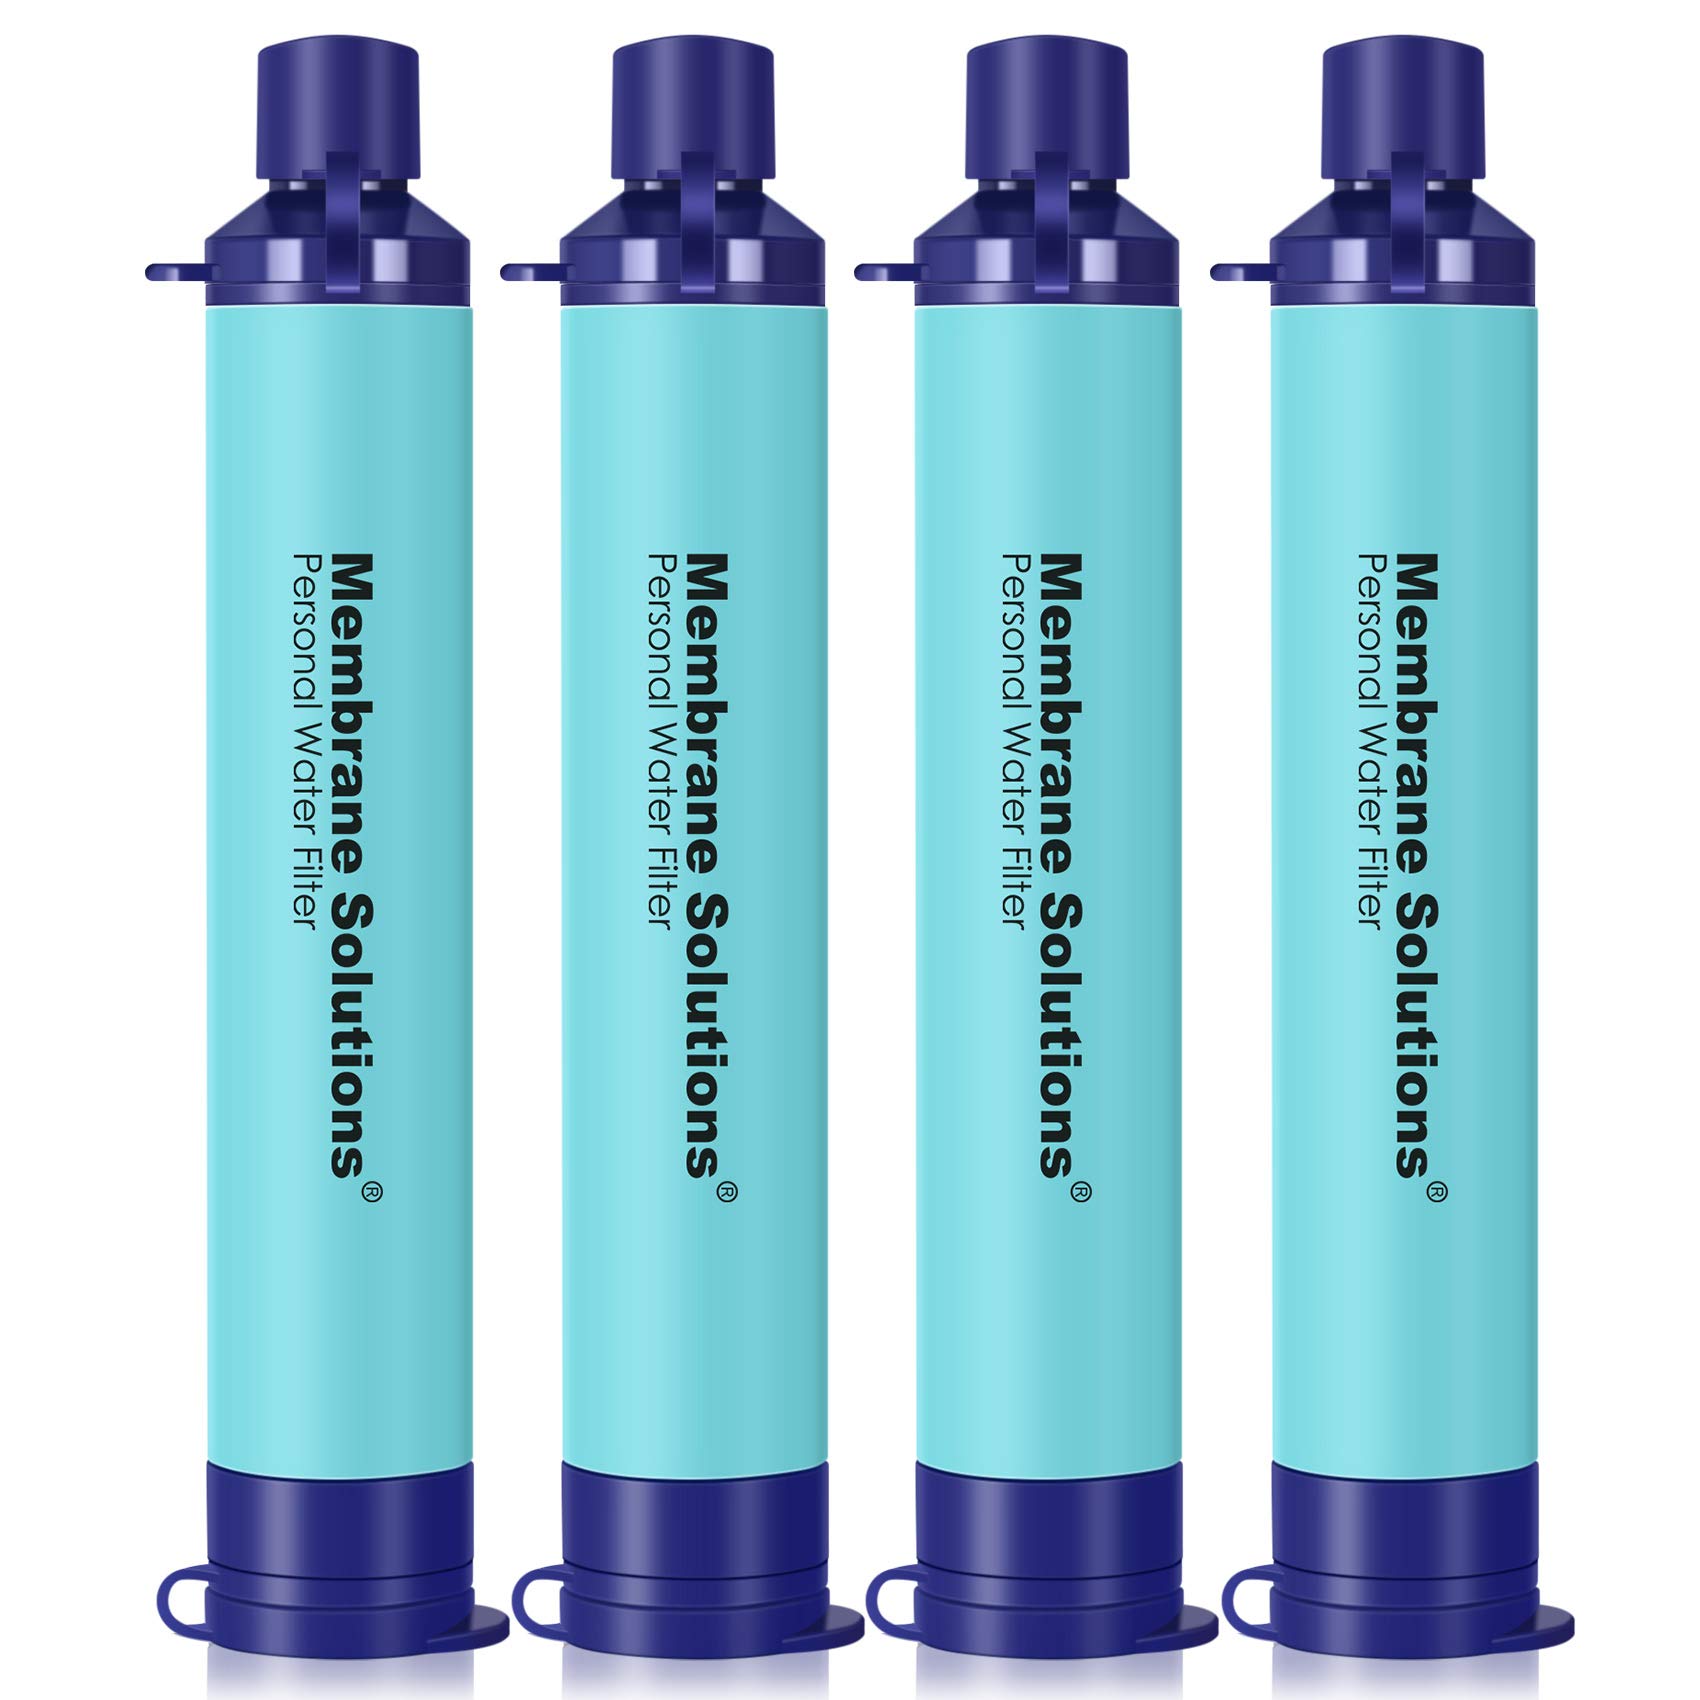 4 pack of Membrane Solutions Water Filter Straws $15.59